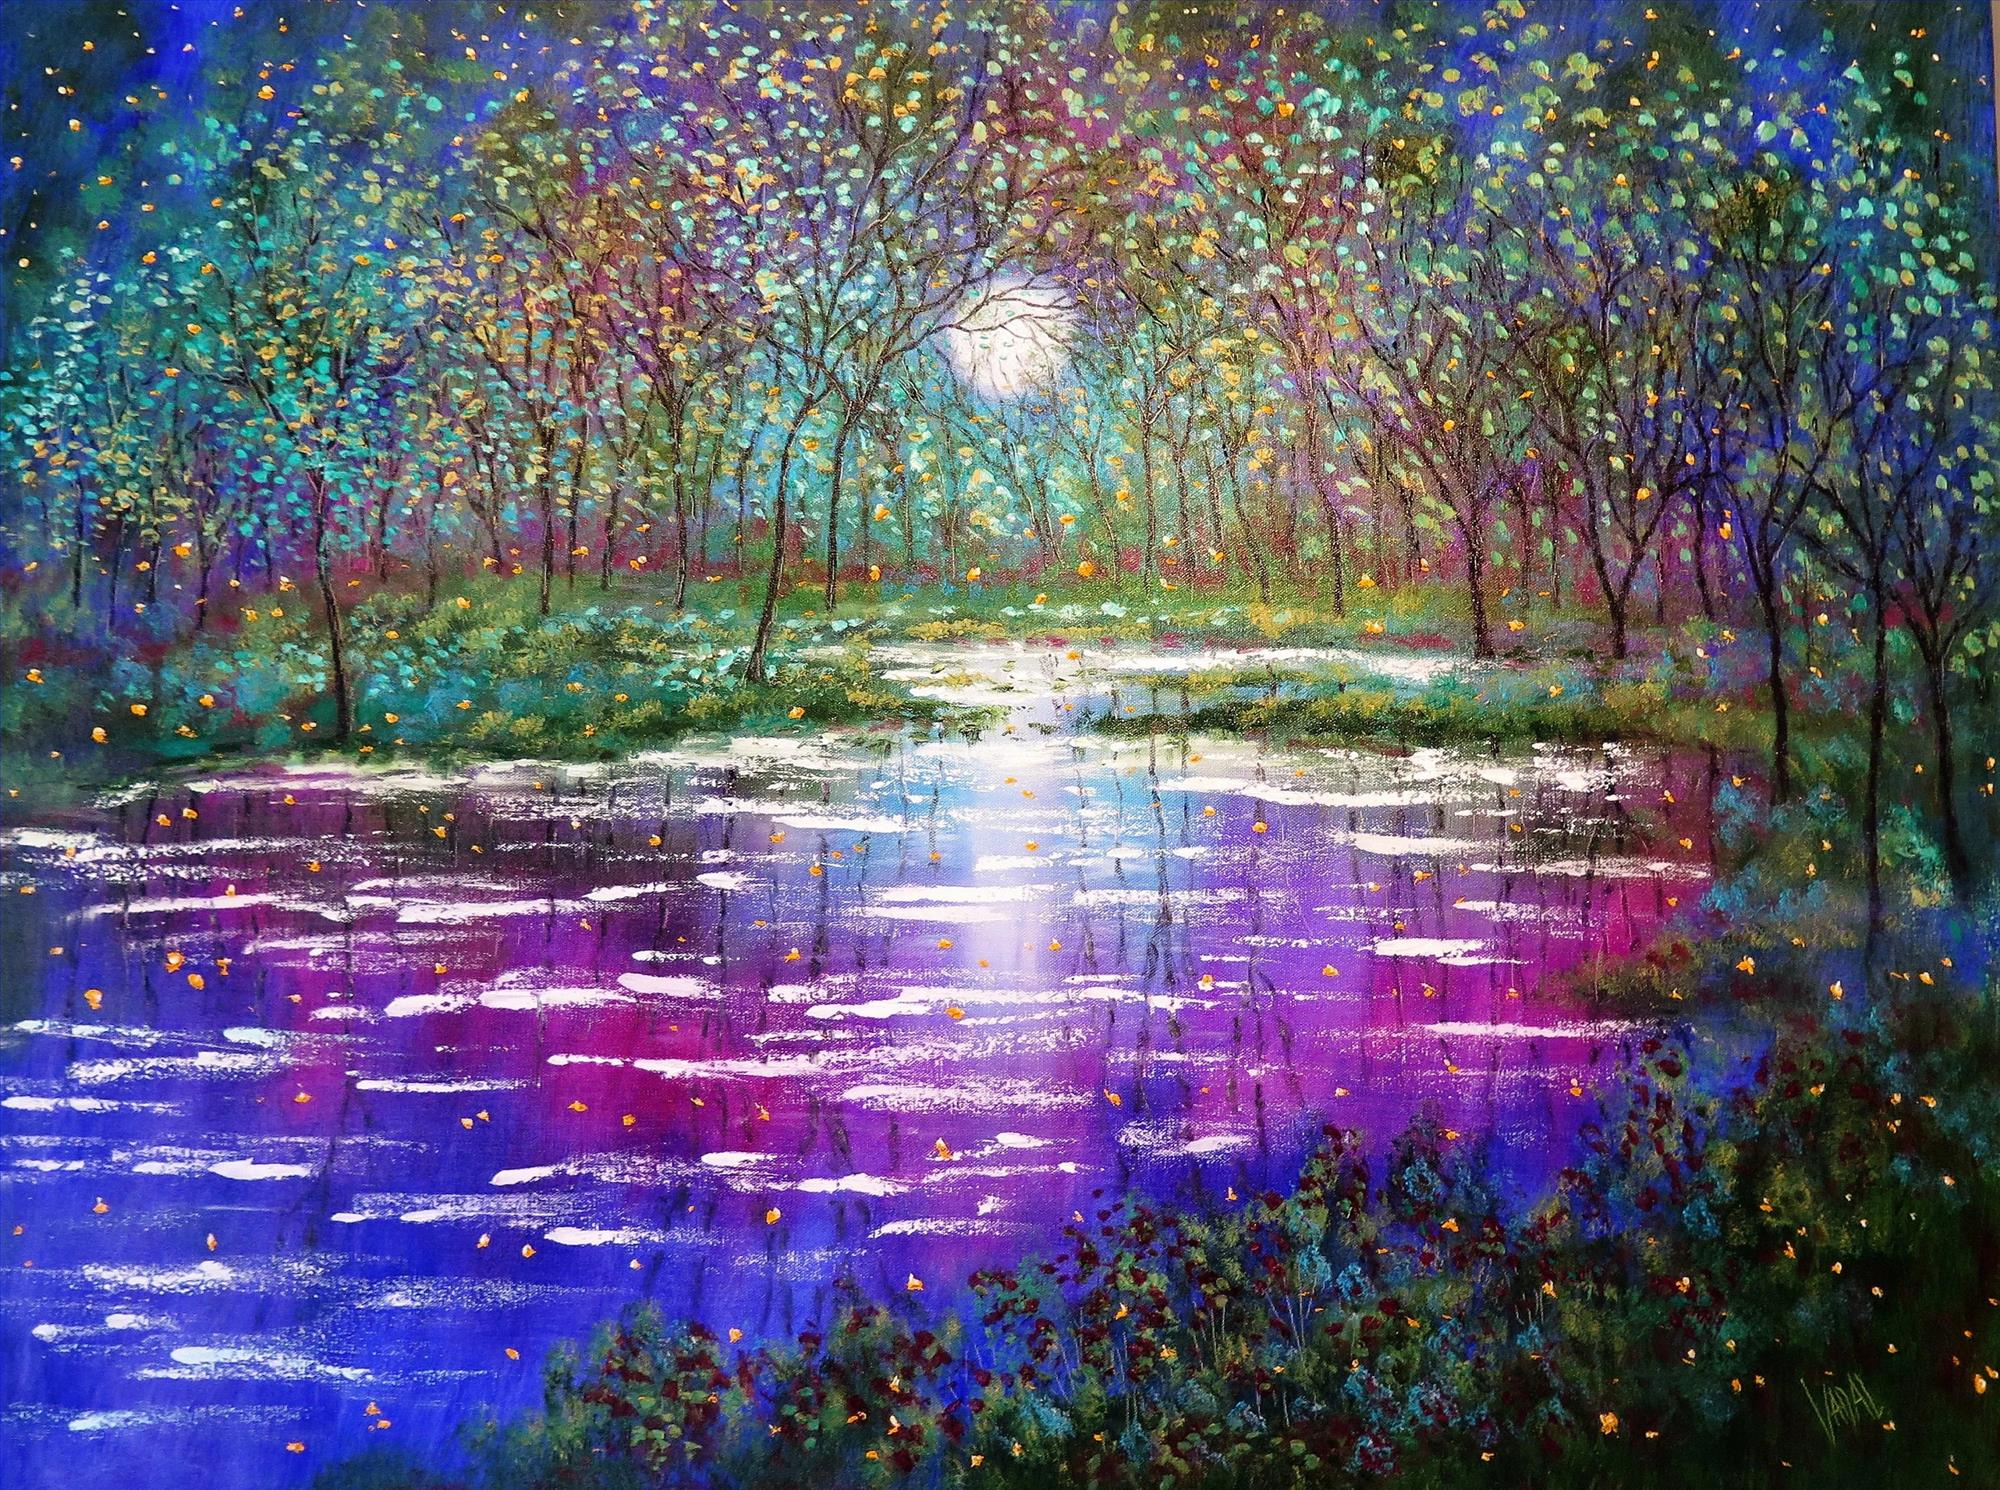 Landscape Spring Trees Lake and Fireflies garden decor scenery wall art nature landscape texture Oil Paintings